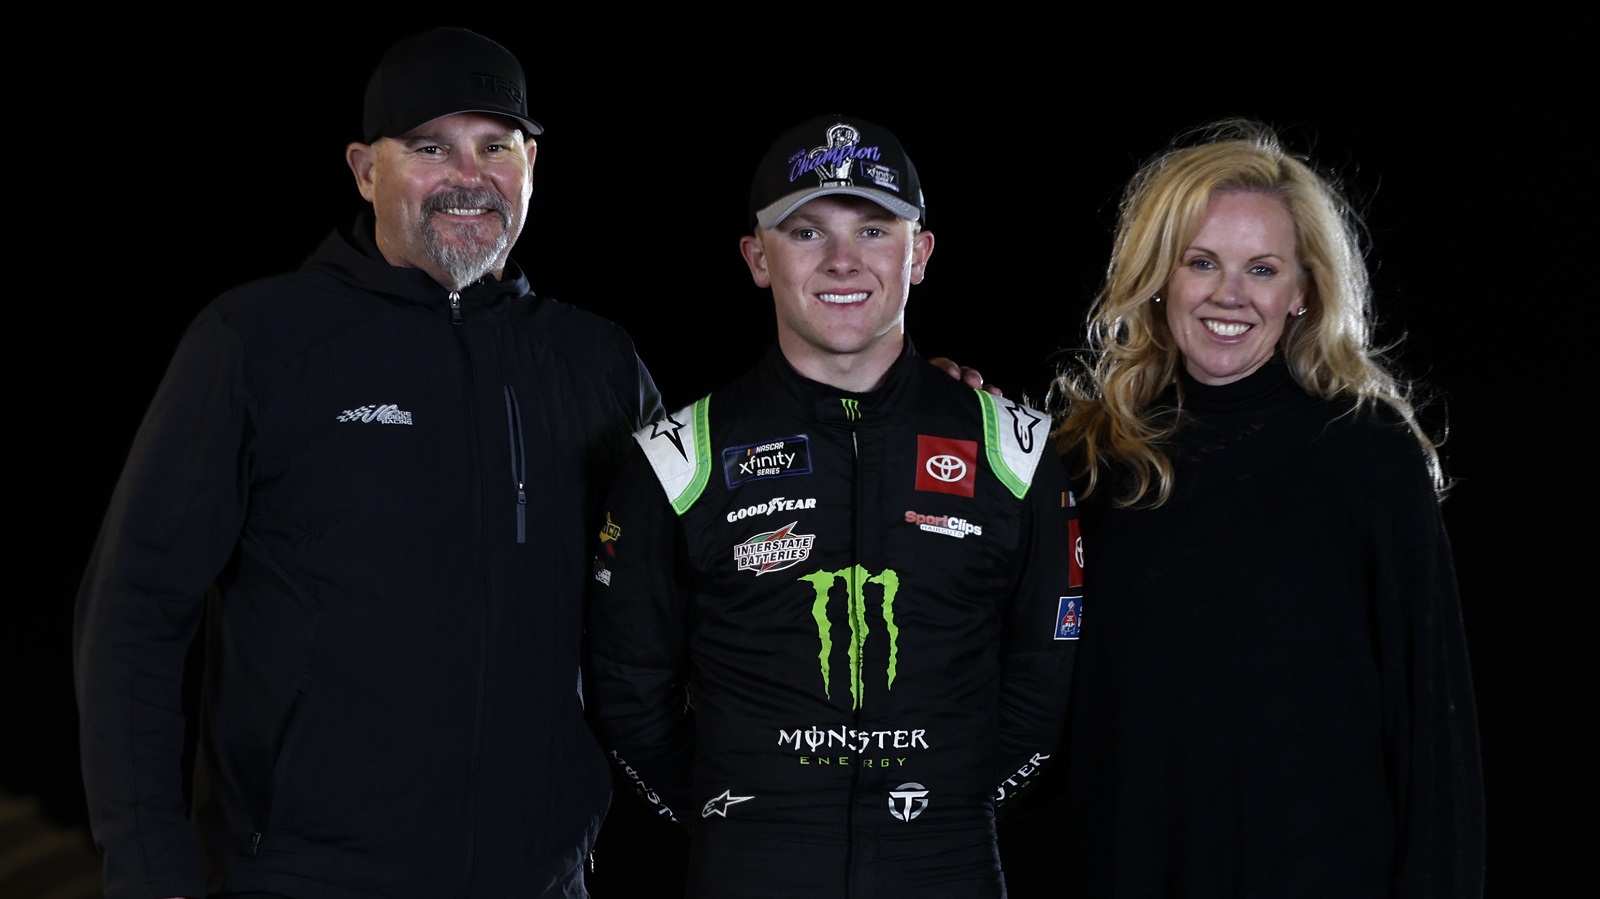 Ty Gibbs poses with his father, Coy Gibbs and mother, Heather Gibbs after winning the NASCAR Xfinity Series championship at Phoenix Raceway on Nov. 5, 2022.